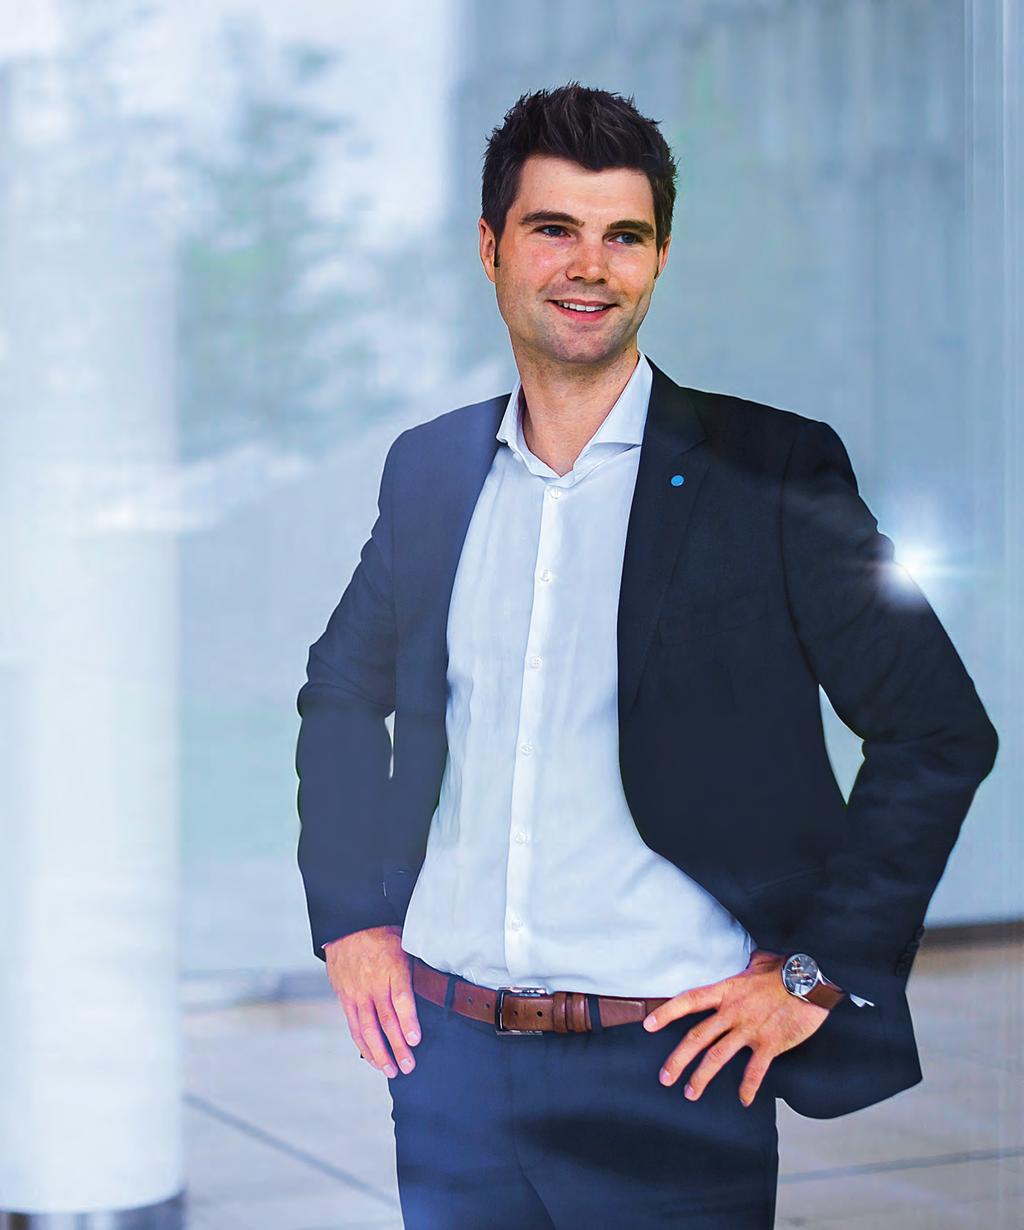 Panorama AGILE Innovation Nico Schön deals every day with bringing new things into the world. Schön, 30, works for thyssenkrupp Components Technology as Manager Innovation Strategy.